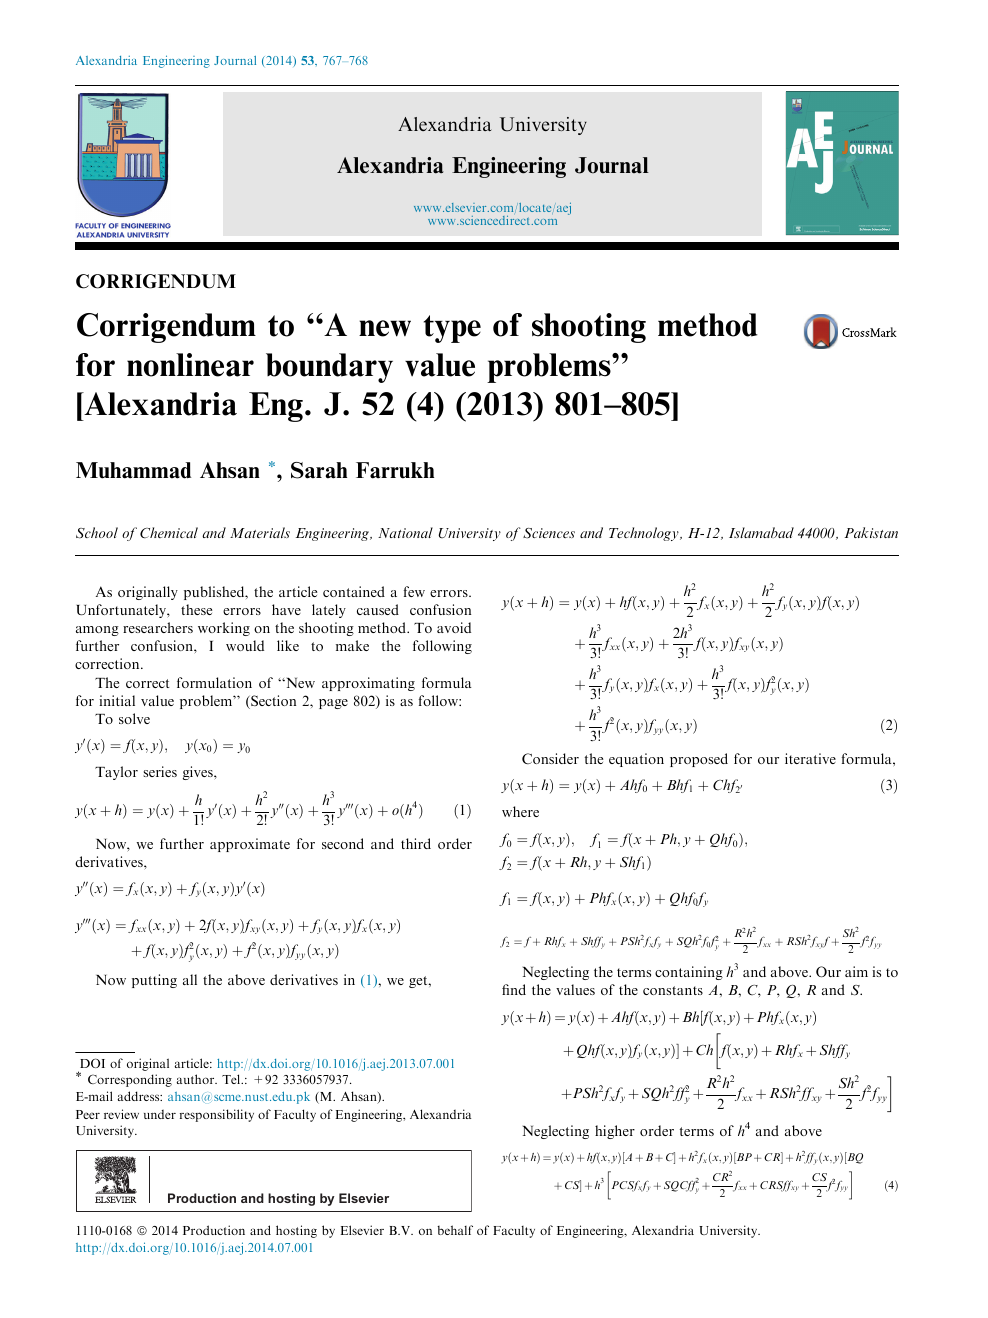 Corrigendum To A New Type Of Shooting Method For Nonlinear Boundary Value Problems Alexandria Eng J 52 4 13 801 805 Topic Of Research Paper In Computer And Information Sciences Download Scholarly